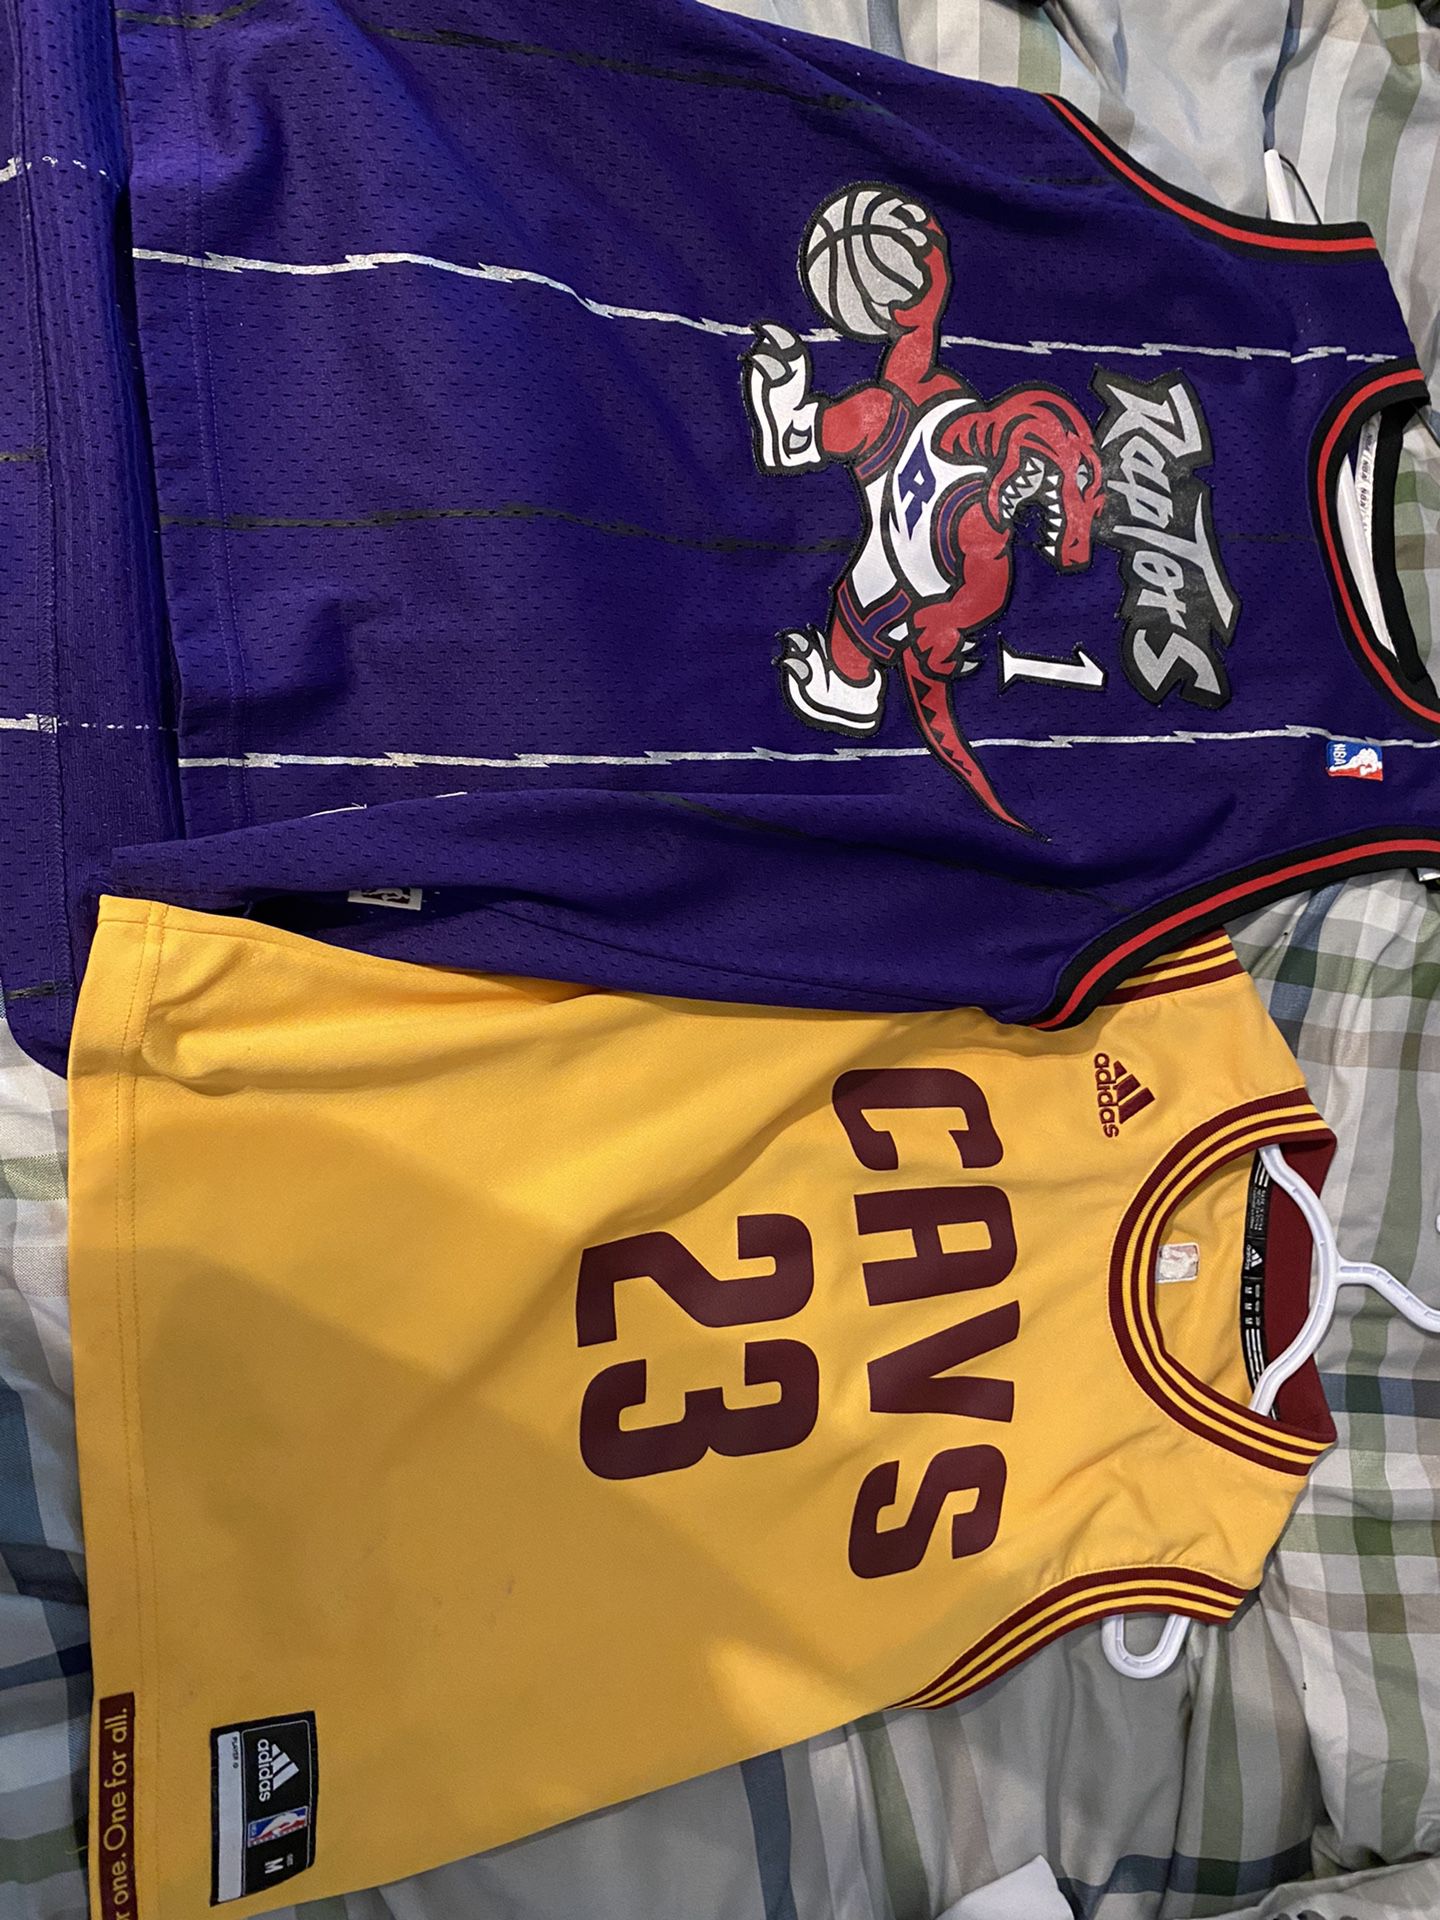 Used Basketball Jerseys for sale